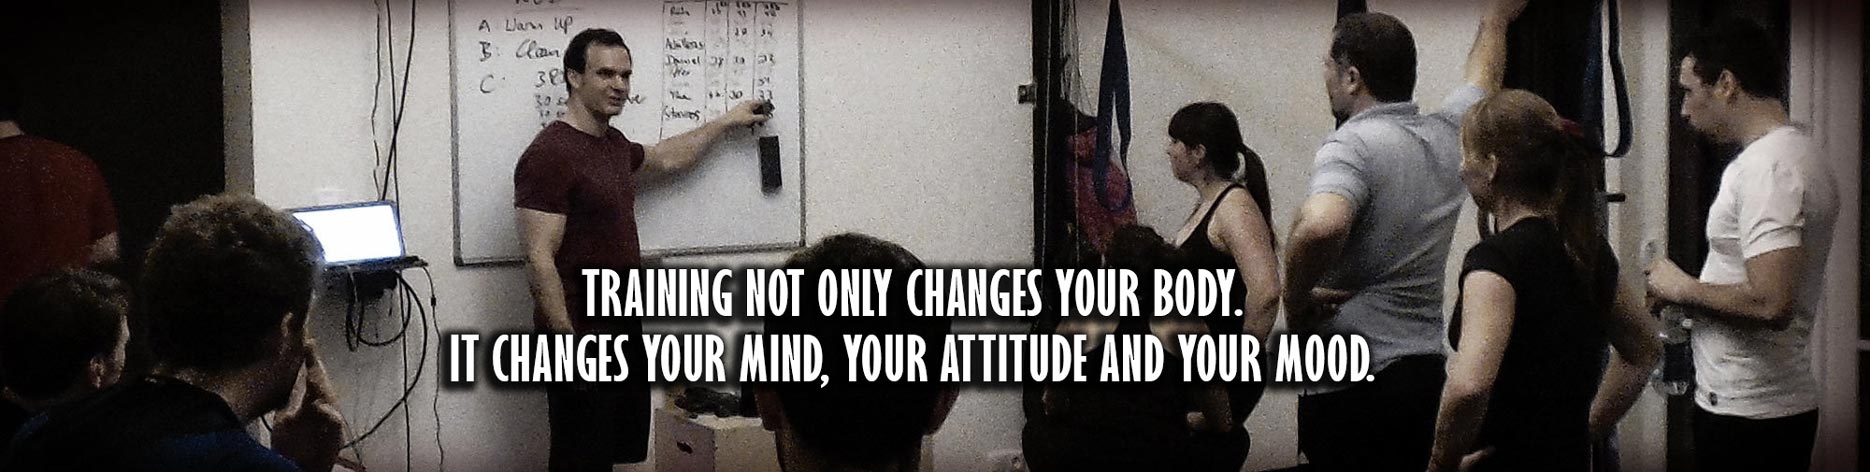 Training not only changes your body. It changes your mind, your attitude and your mood.